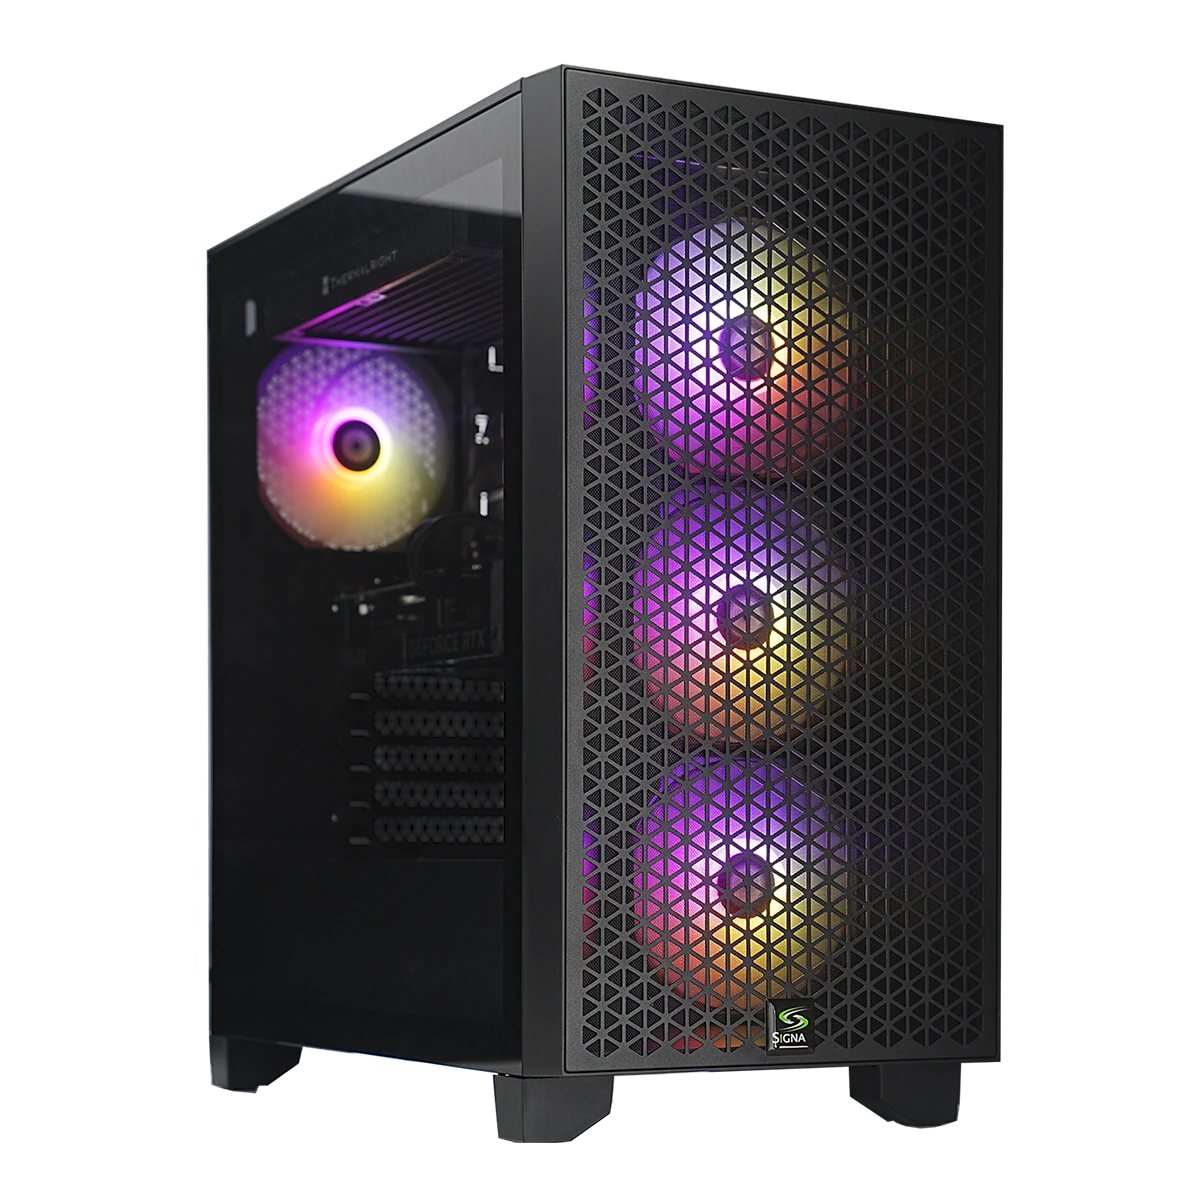 *SALE TILL MAY 31st* Signa Extreme Custom Built Gaming PC with 360mm AIO Liquid Cooling